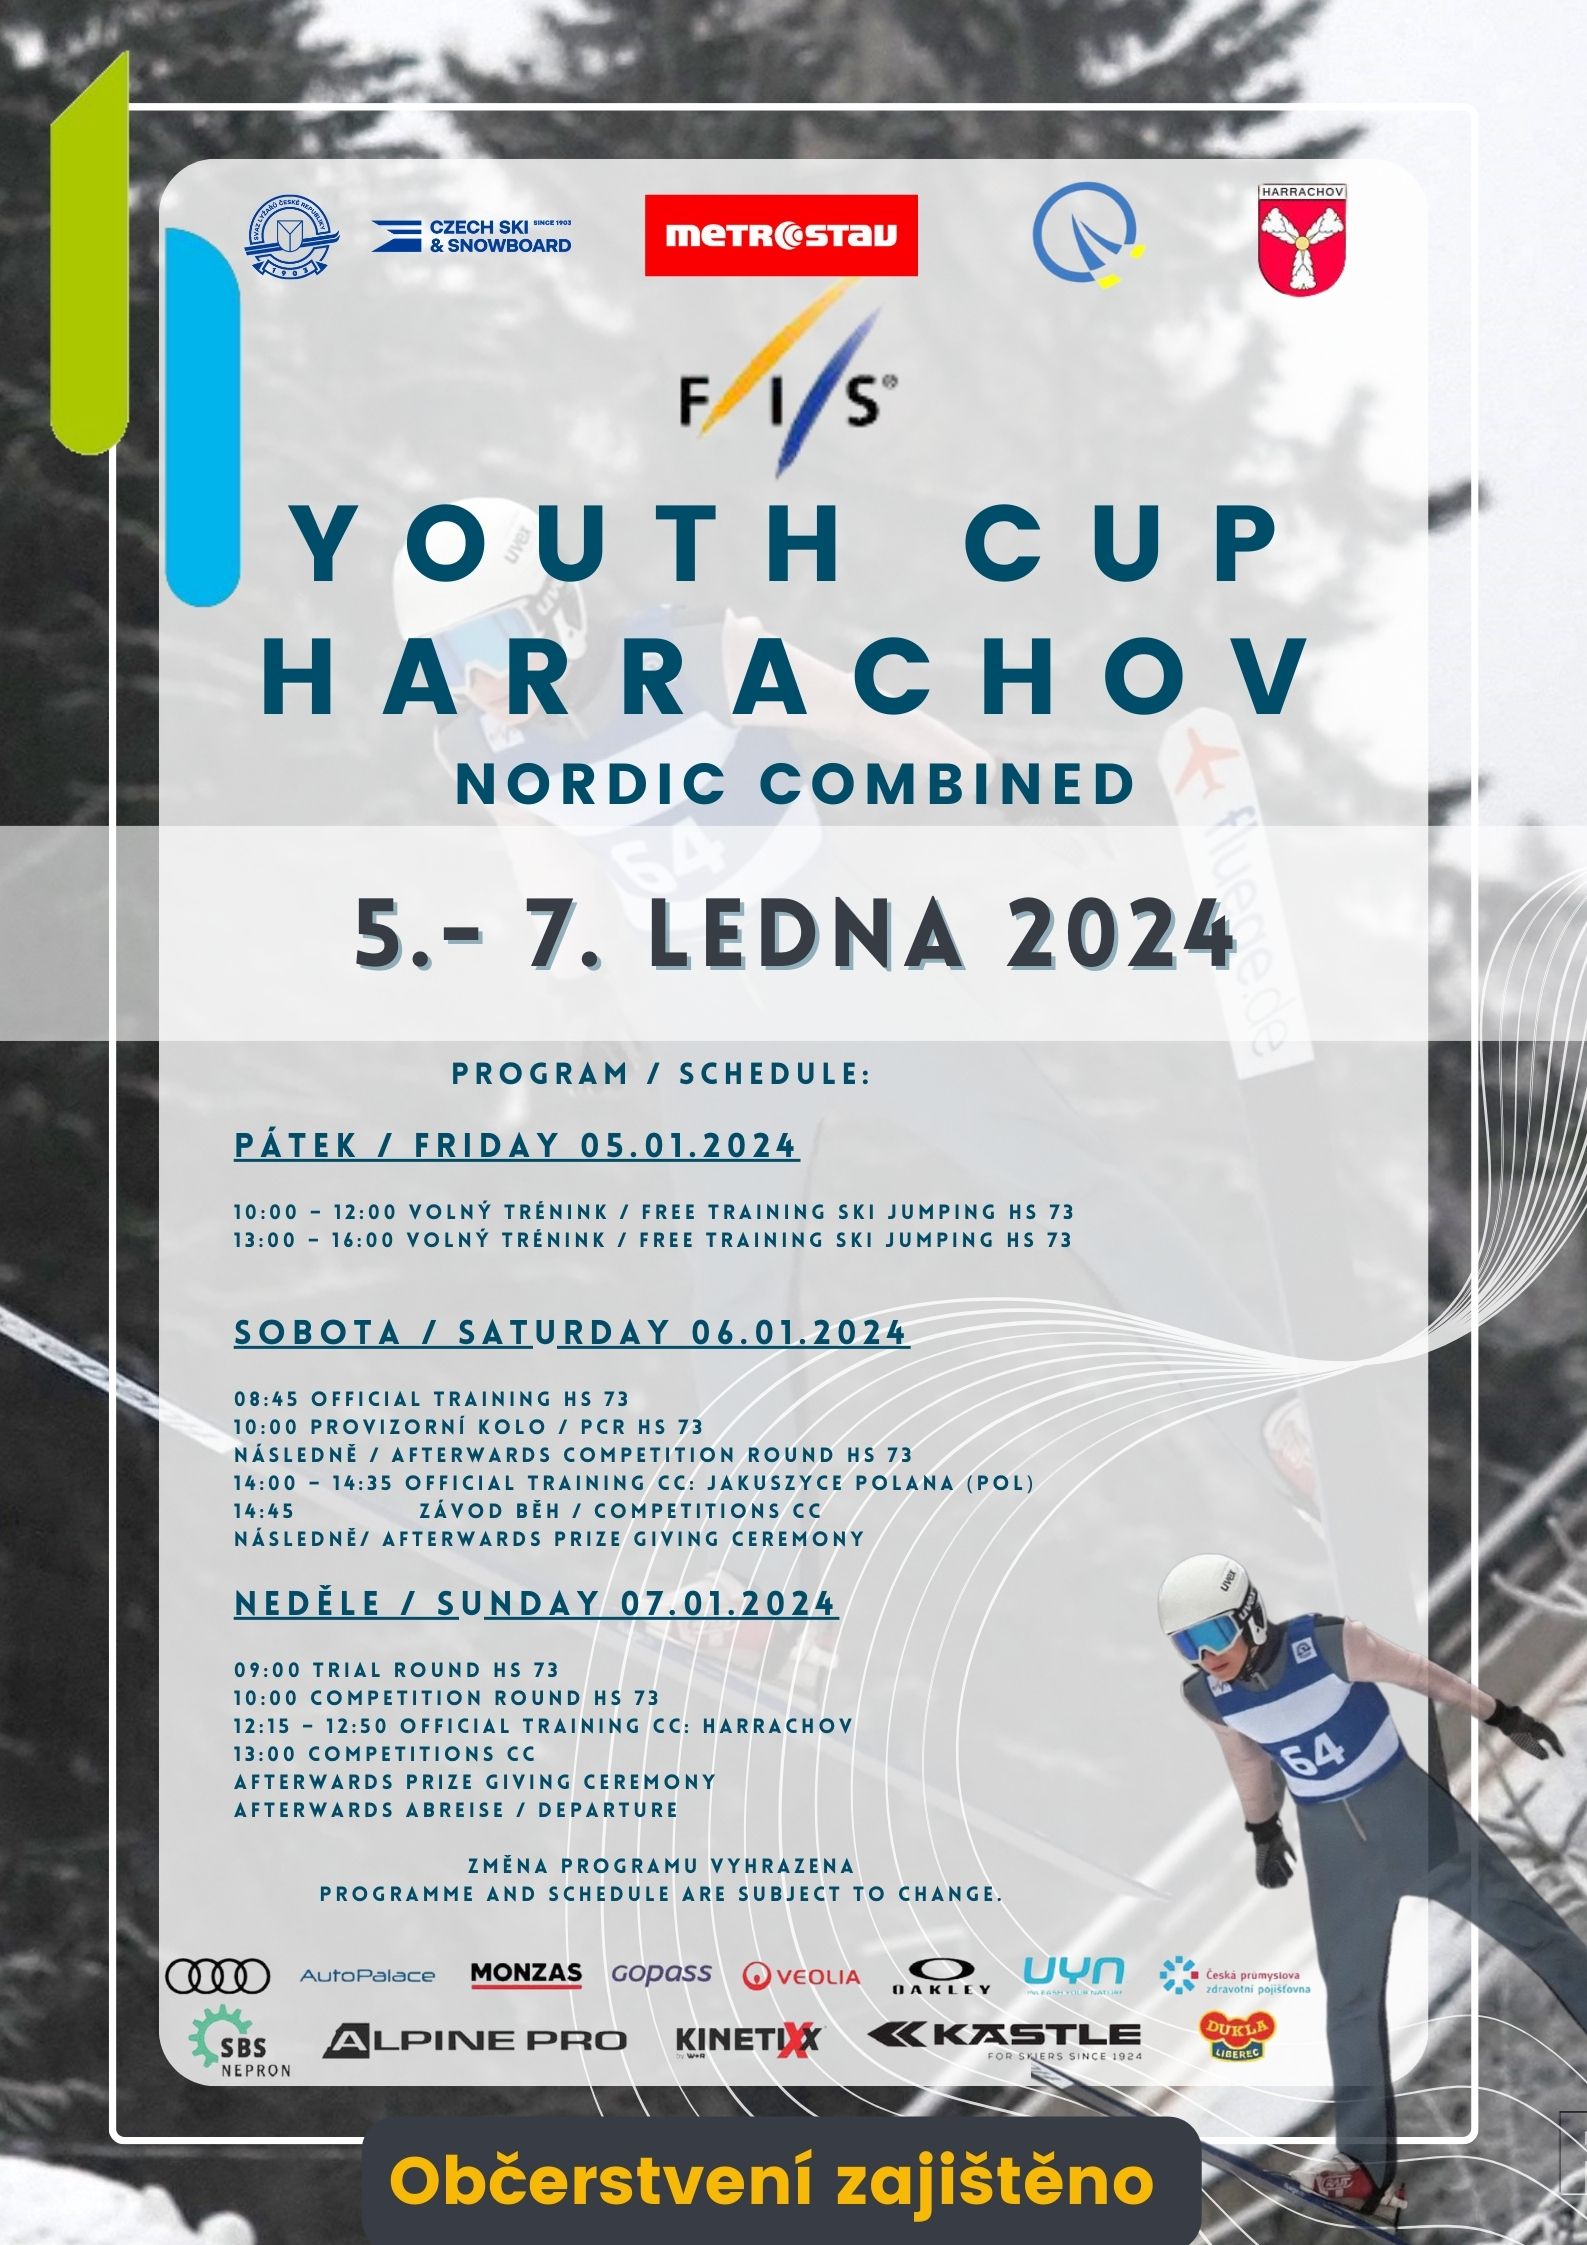 youthcup2024.jpg